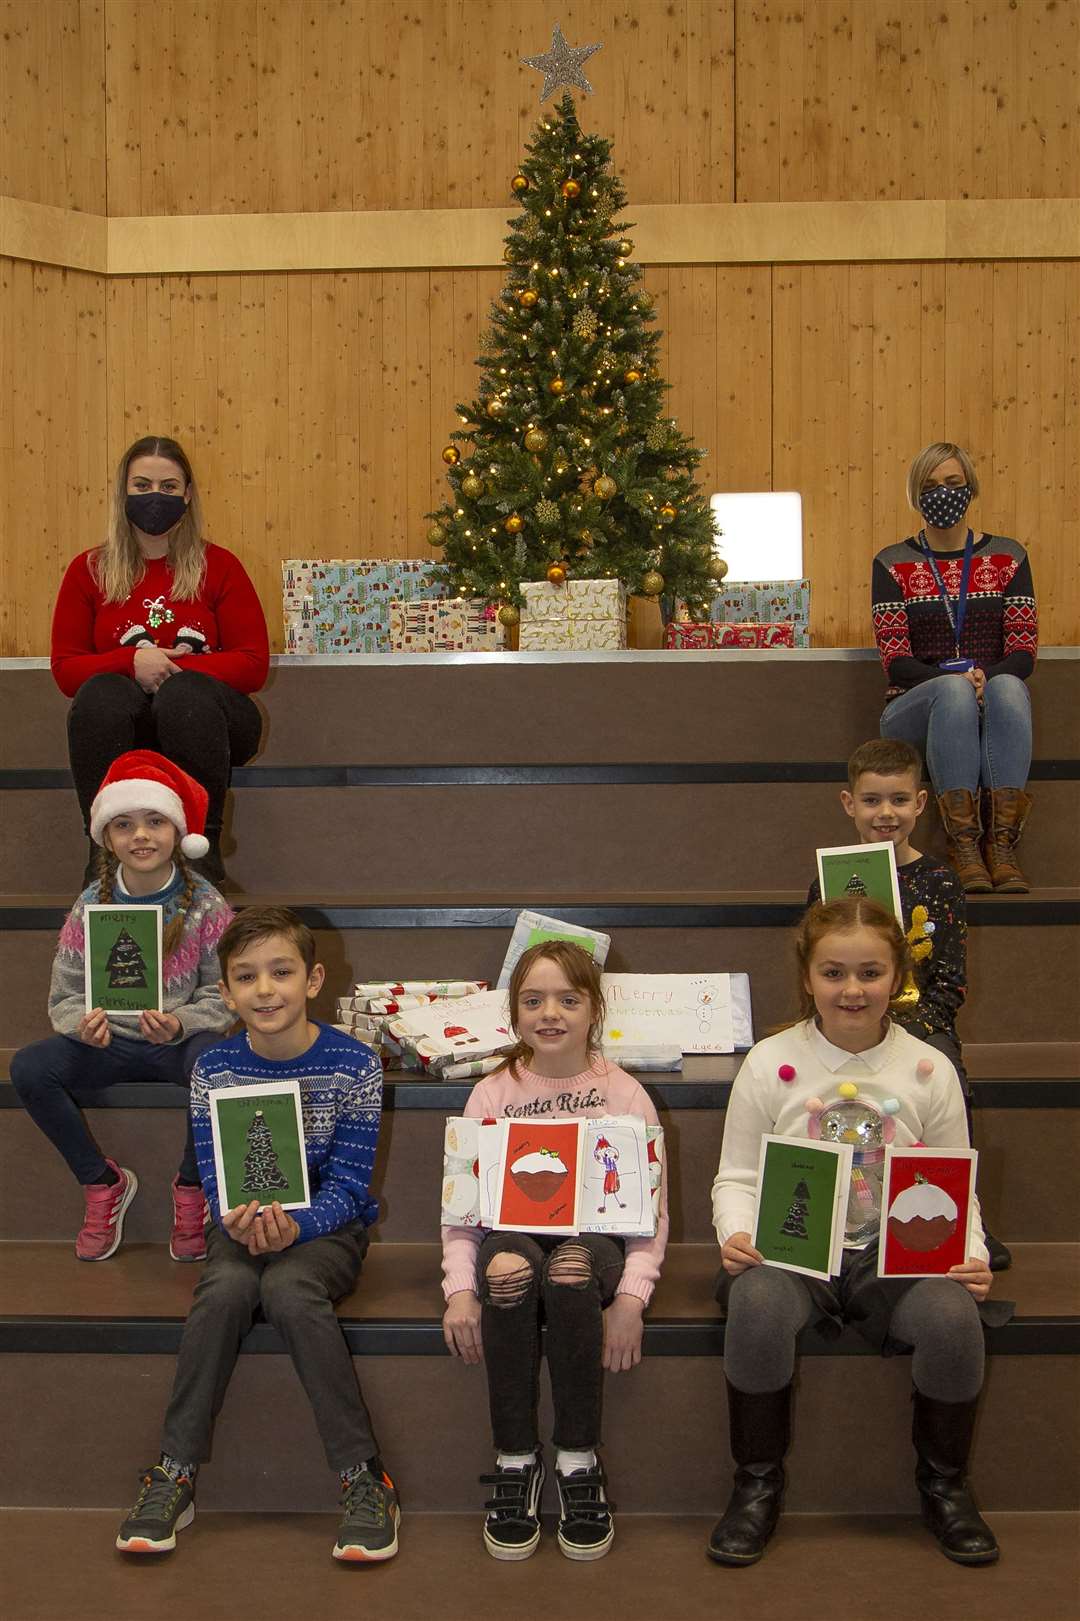 Rubi McLaughlin (centre) with mum Kirsty Massie (top left) Midmill Primary School headteacher Katie Finch and pupils Megan Angus, Charlie Corney, Evie Kitchener and Ben McCallum. Picture: Paul Douglas